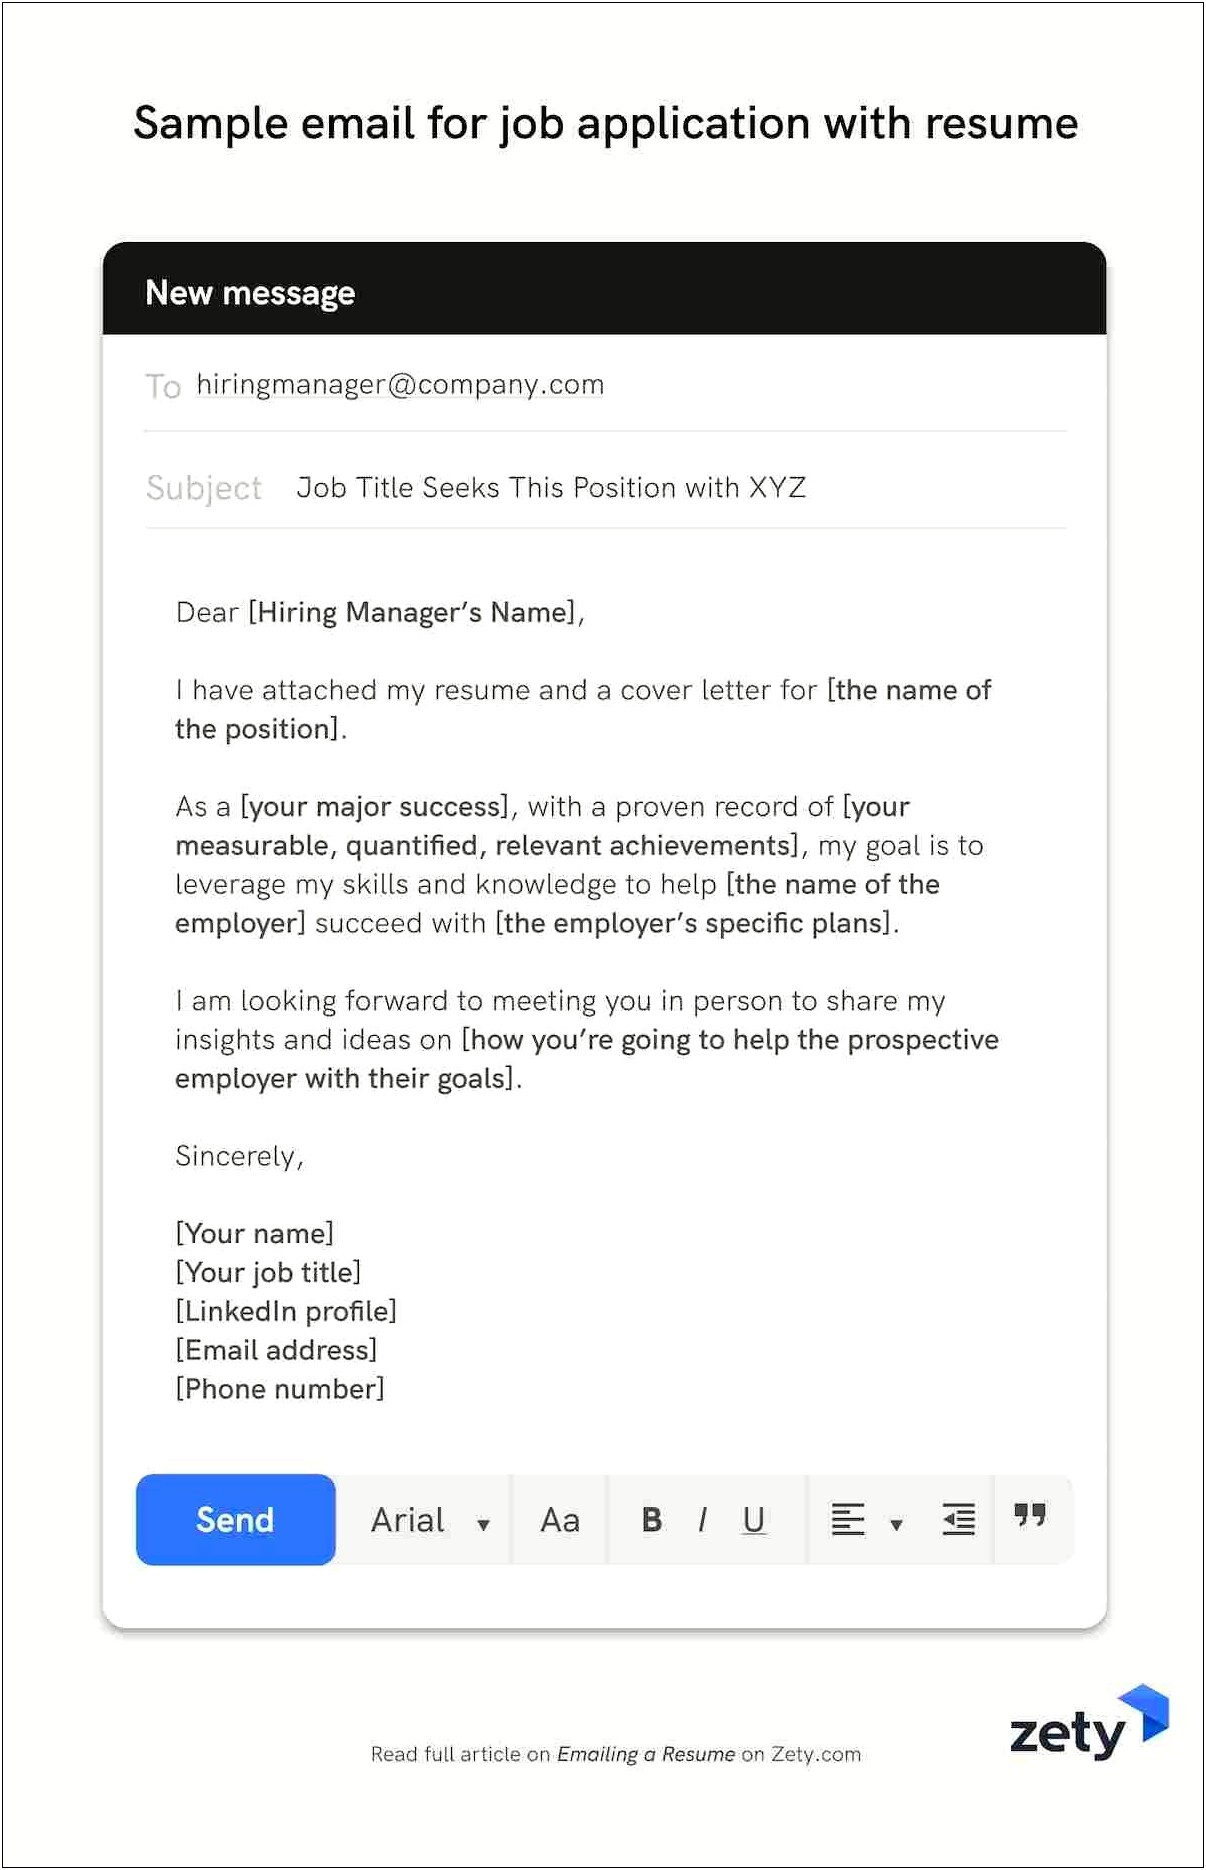 Sending Resume And Cover Letter Through Email